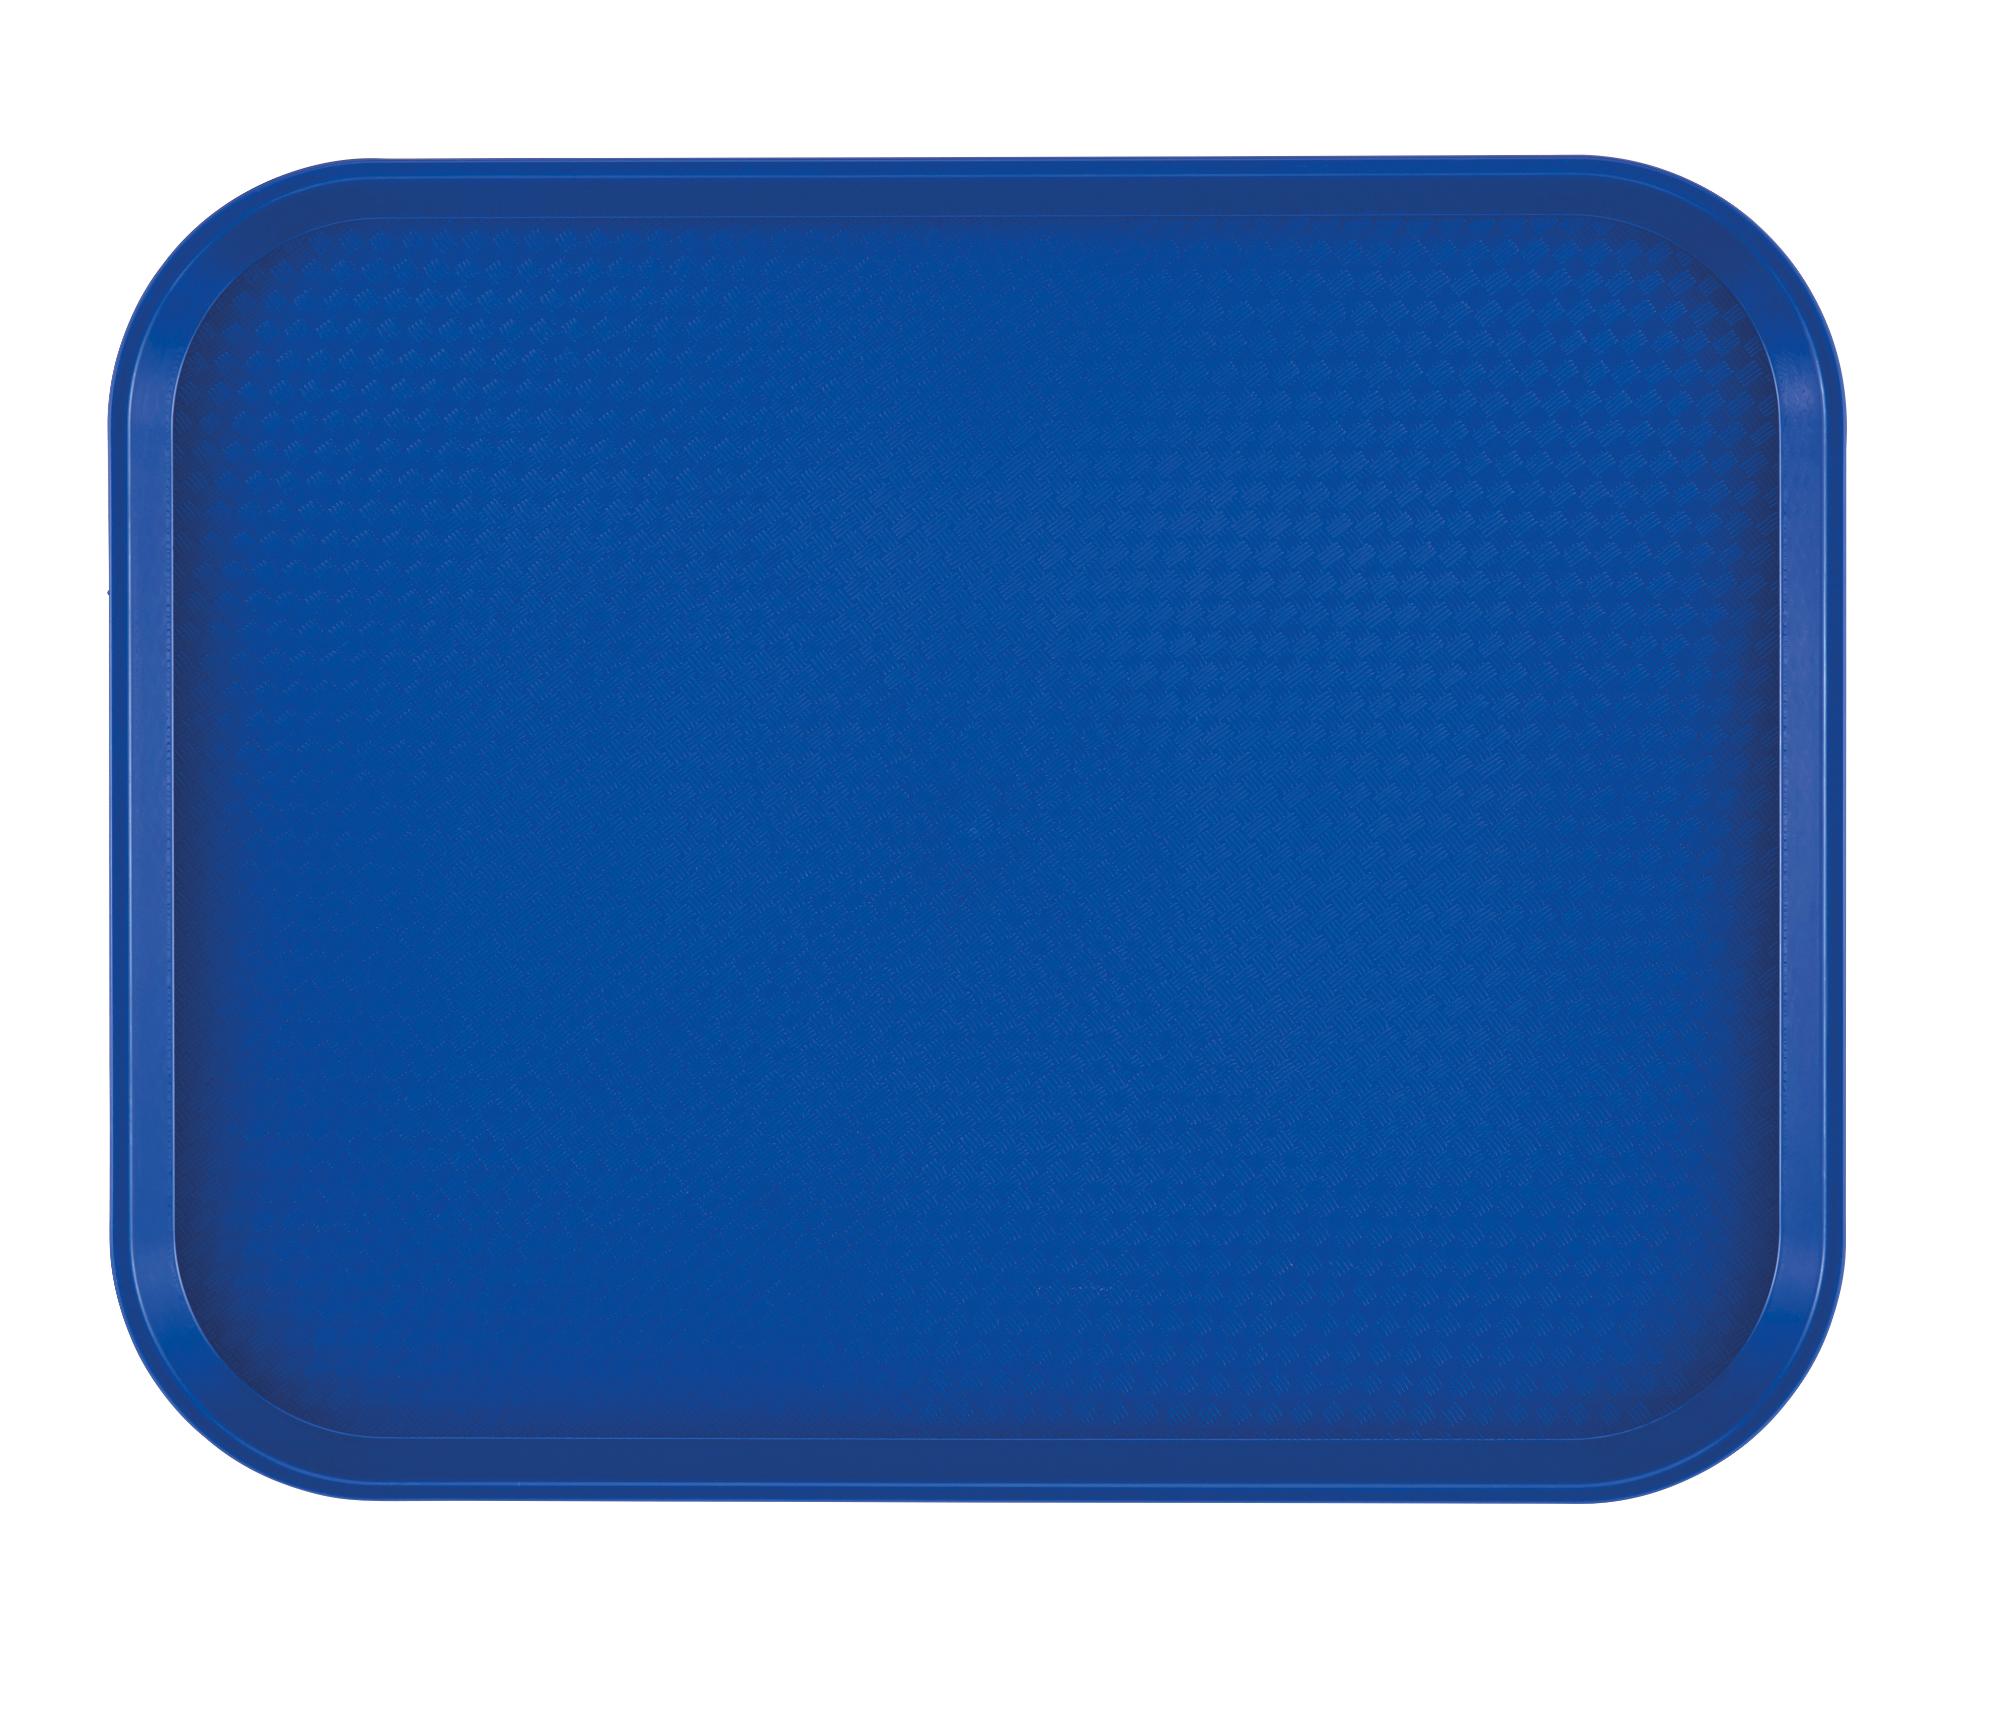 Fast Food polypropylene tray, textured surface, navy, 300x410 mm